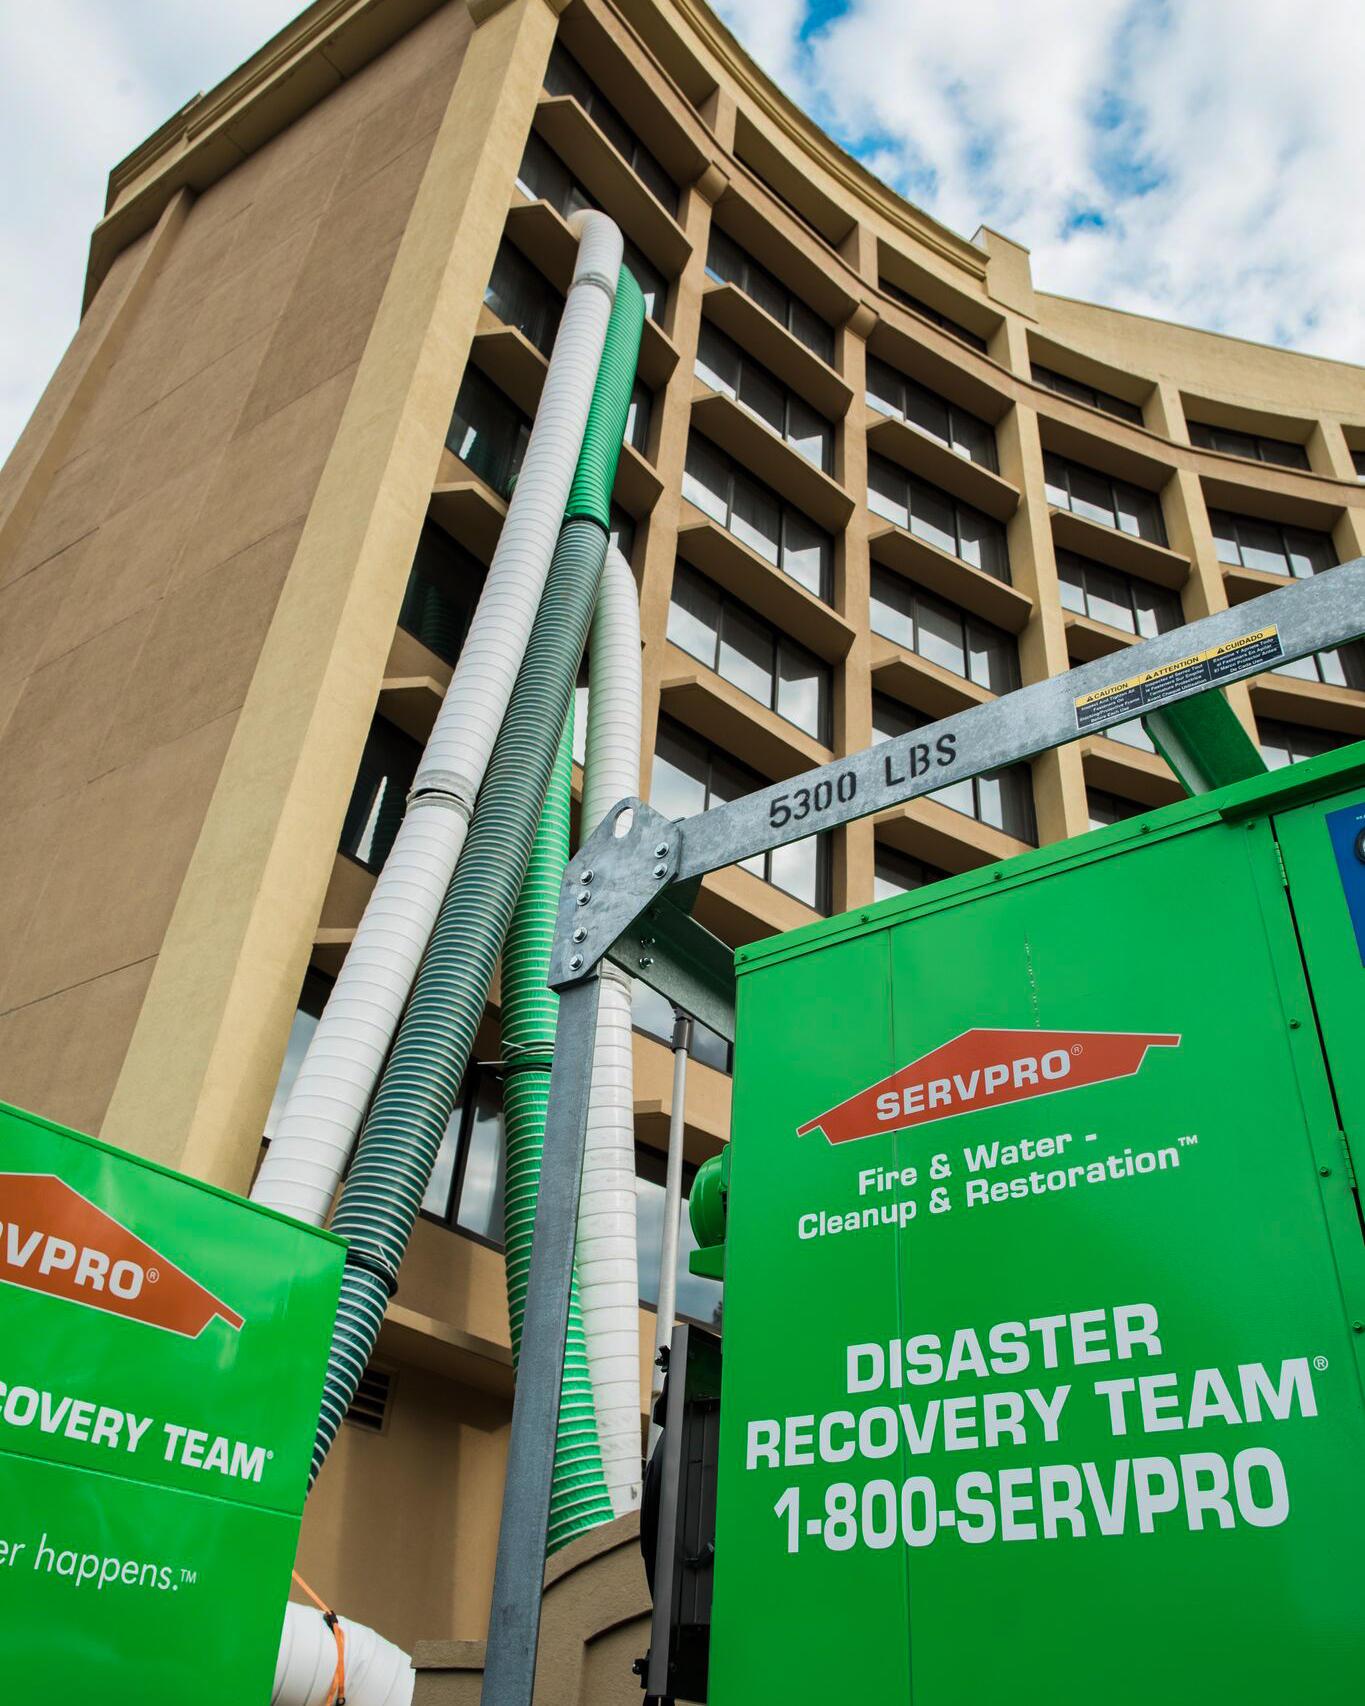 SERVPRO of Rutherford County has the training, experience, and equipment to handle large commercial storm or water damage emergencies.